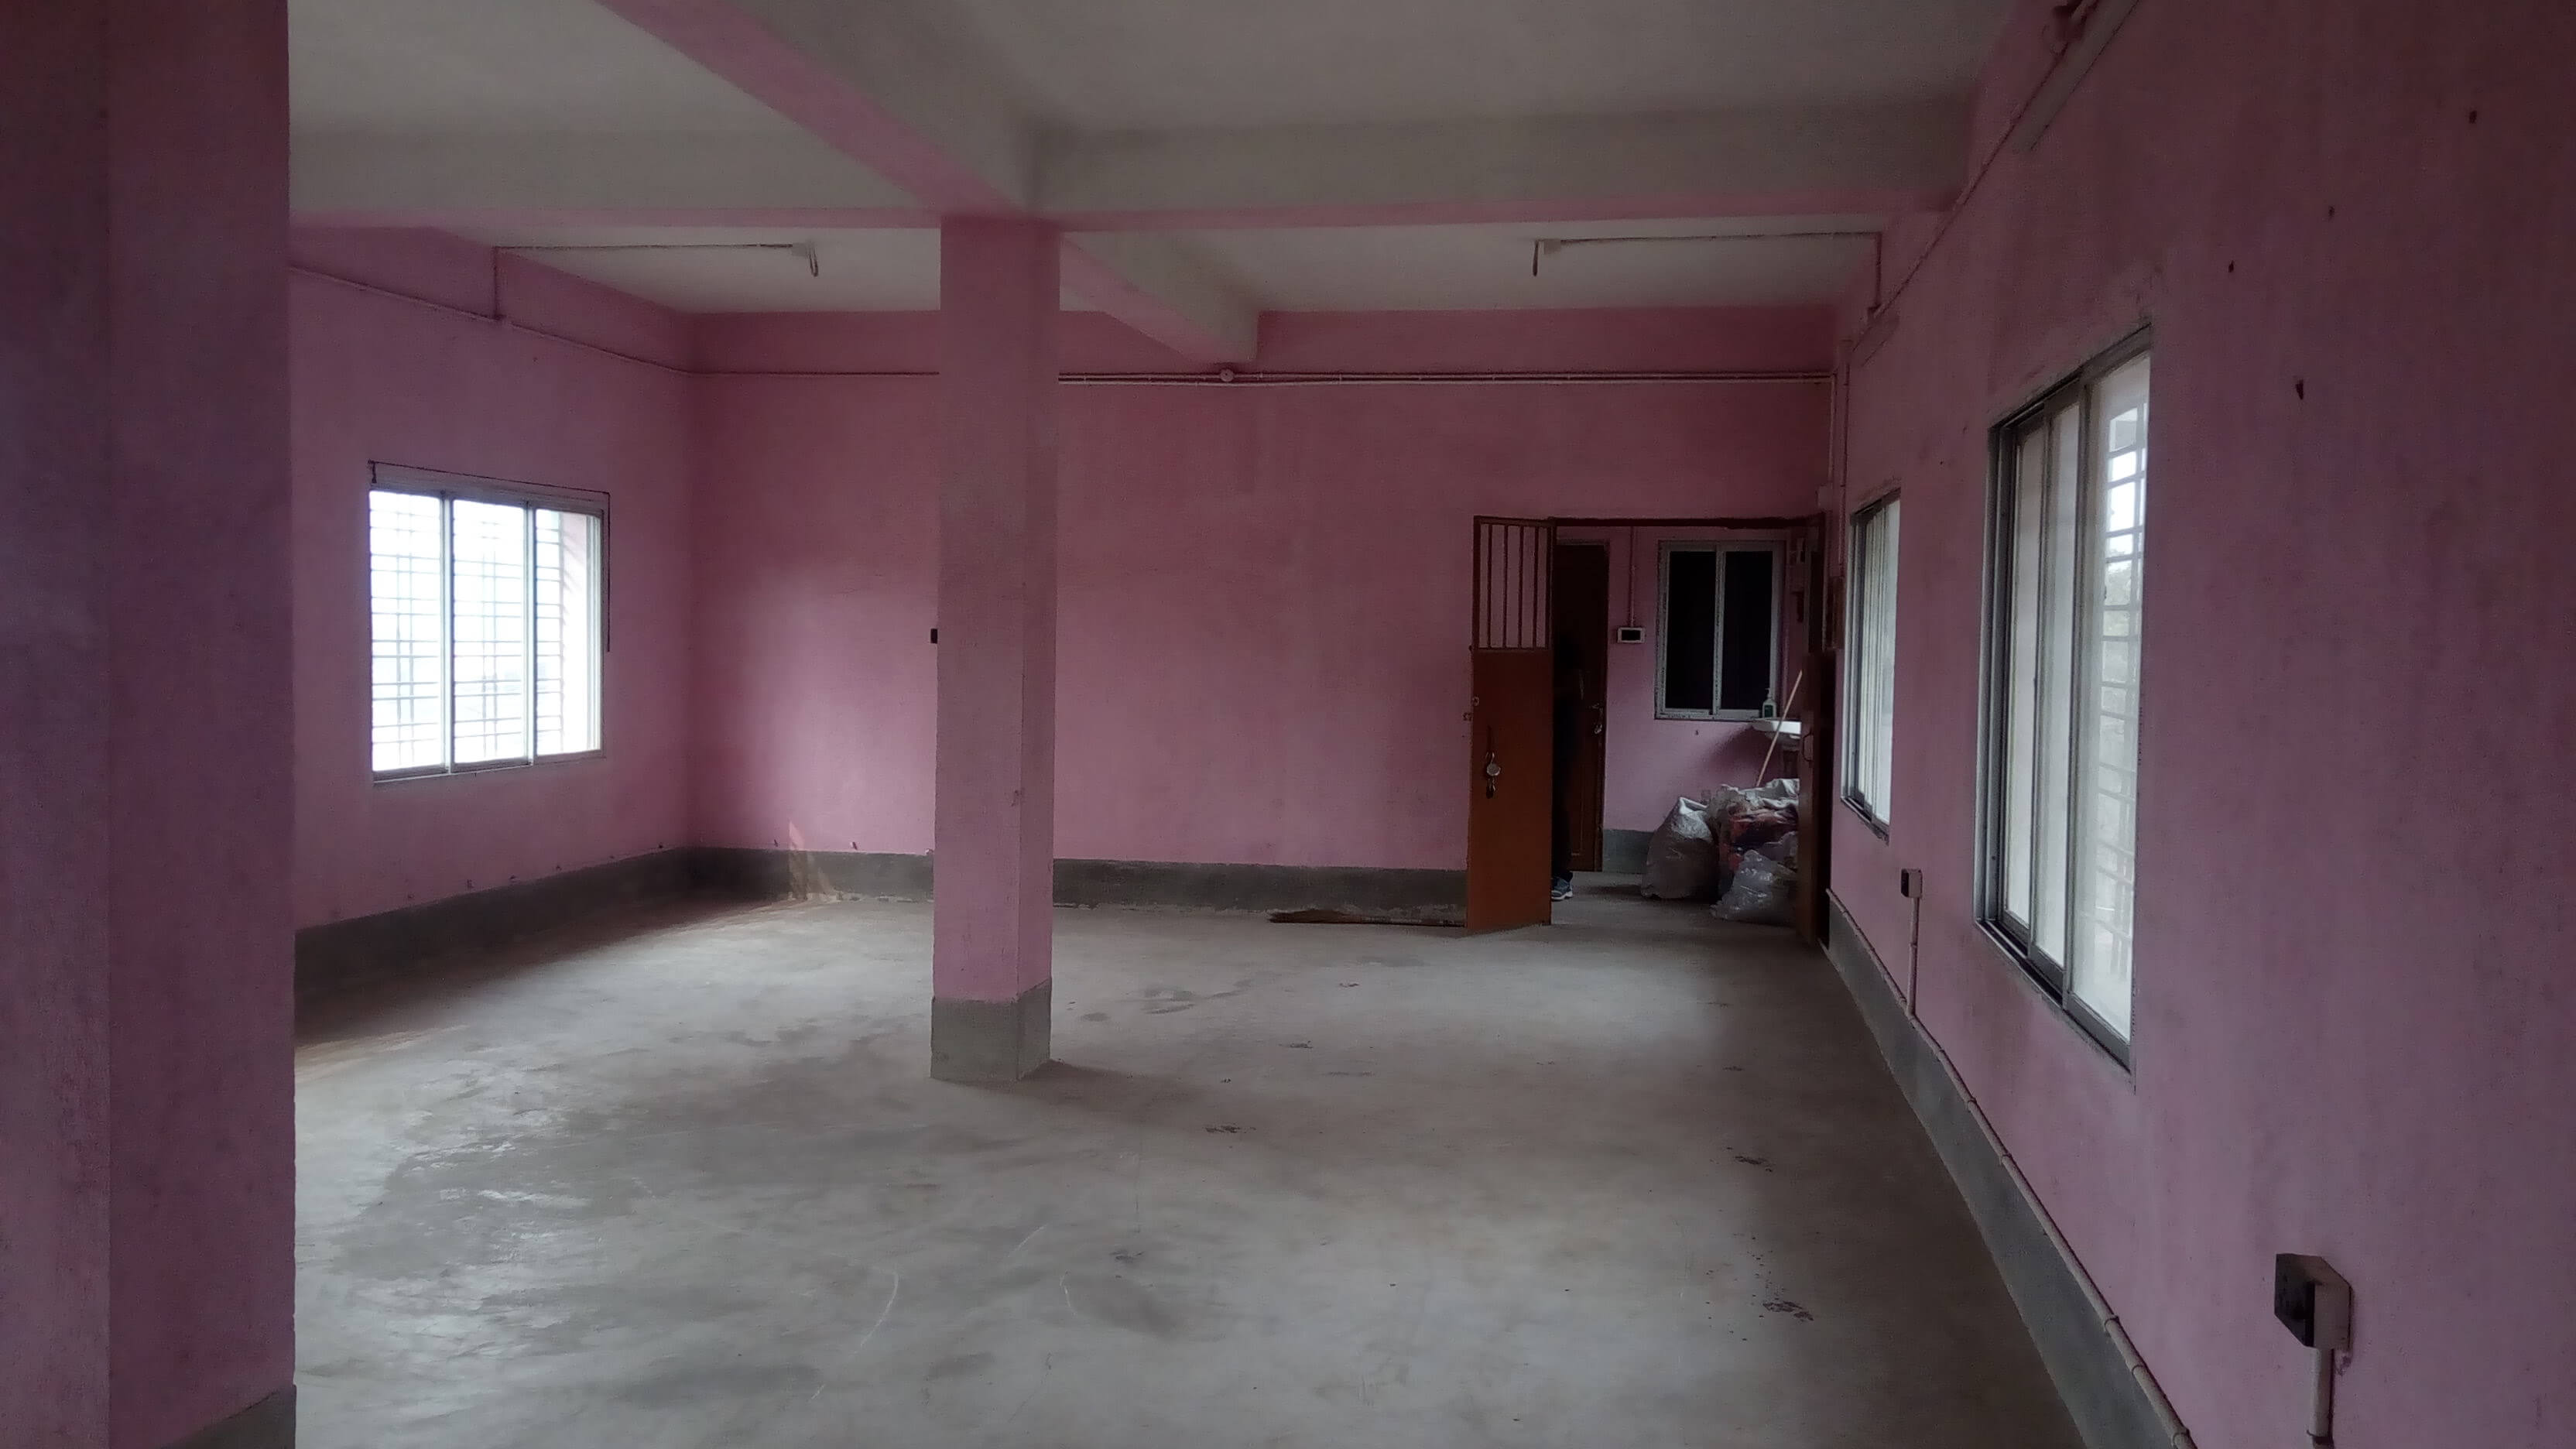 Office For Rent in Madhyamgram,Kolkata (Id:3473)